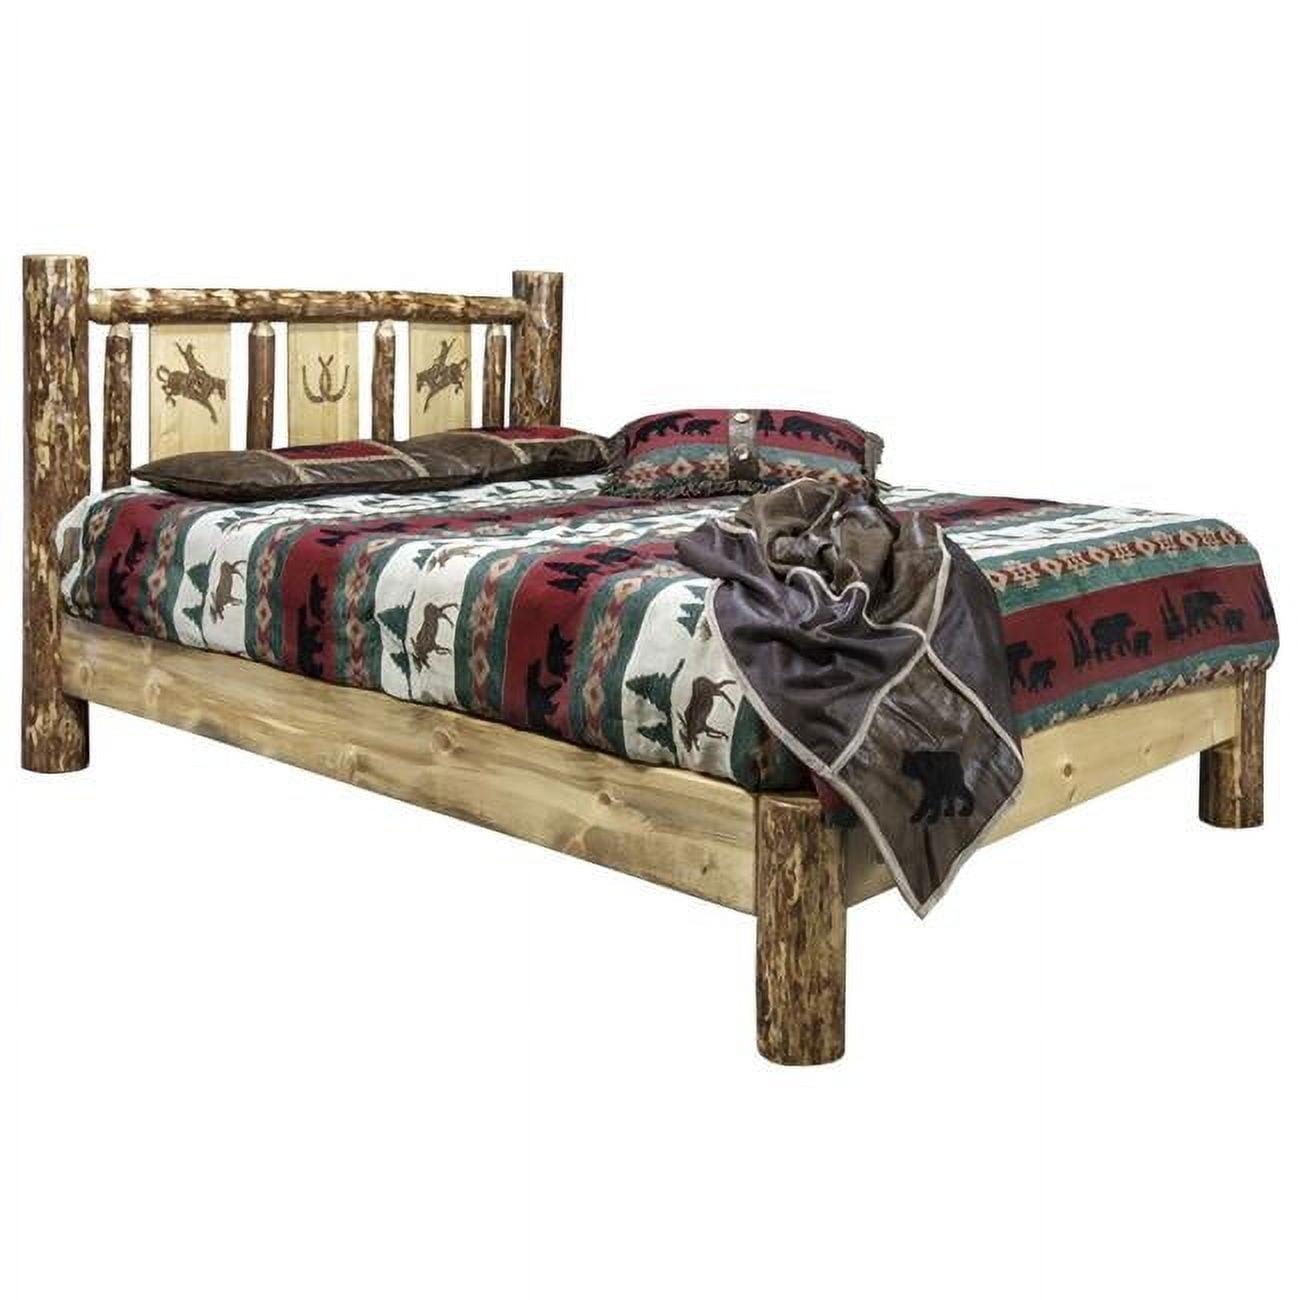 Rustic Lodge King Bed with Bronc Engraved Pine Headboard